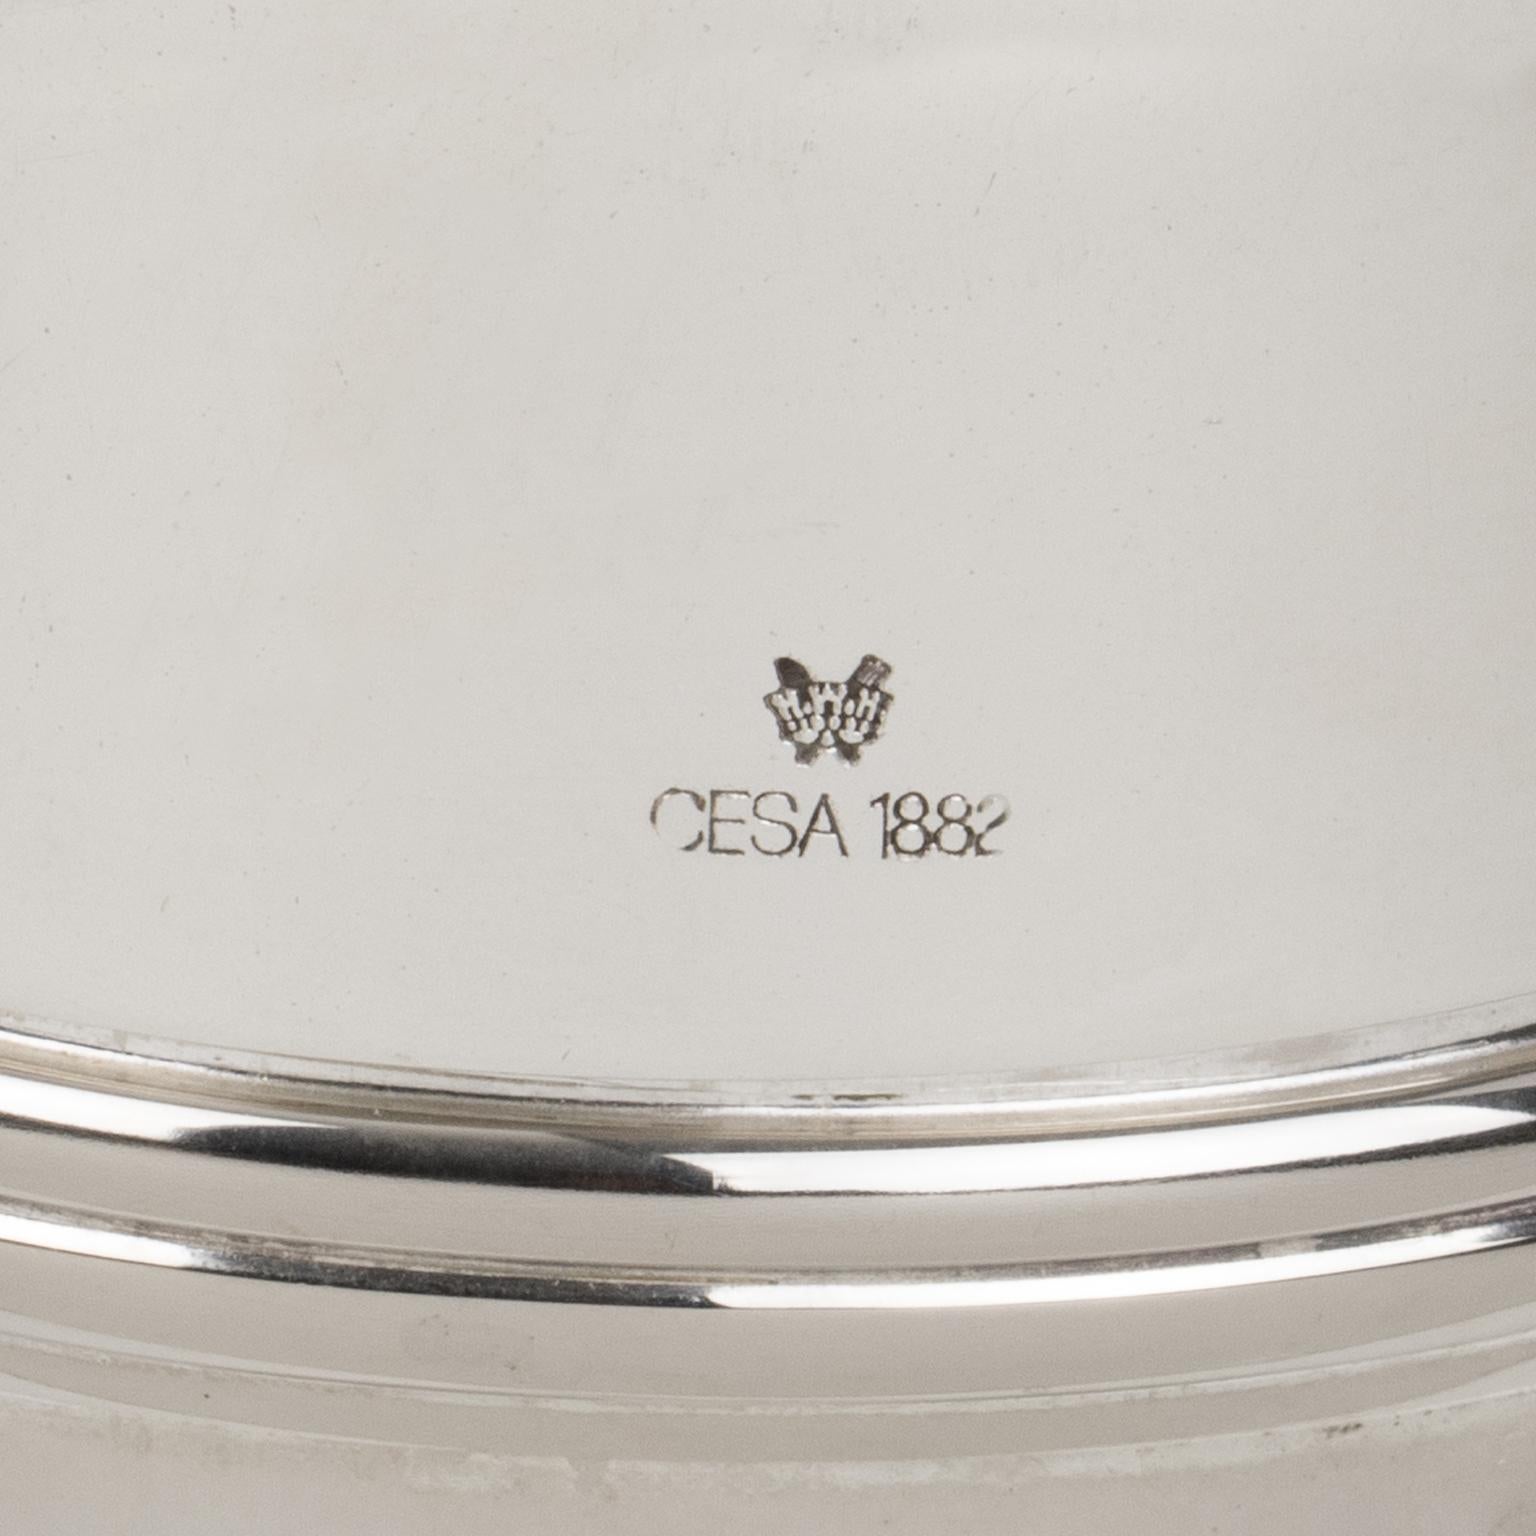 Mid-20th Century Cesa 1882, Italy, Modernist Silver Plate Cocktail Shaker For Sale